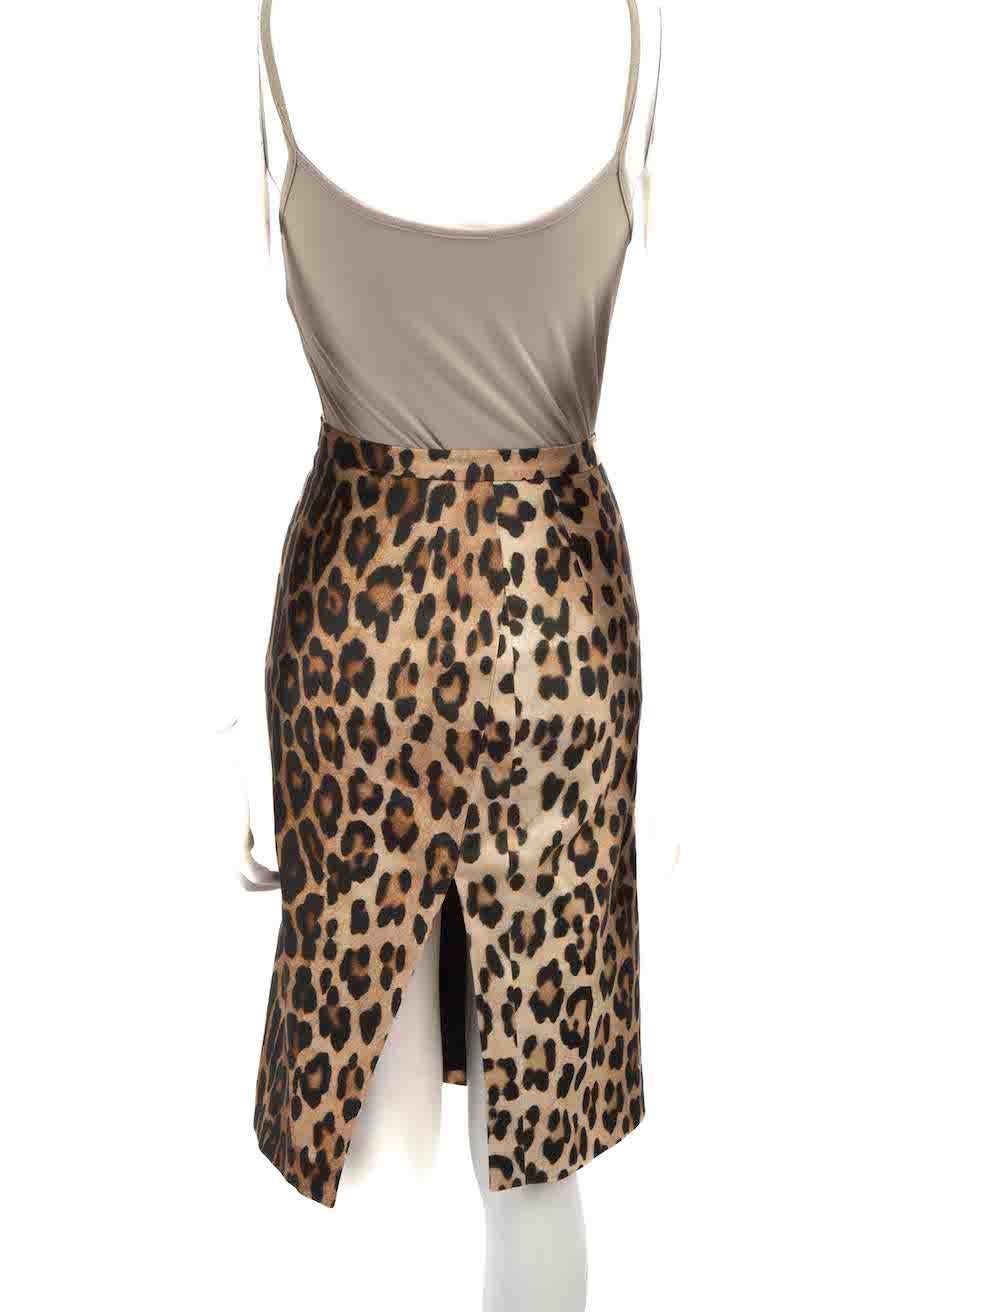 Altuzarra Brown Leopard Print Pencil Skirt Size S In Good Condition For Sale In London, GB